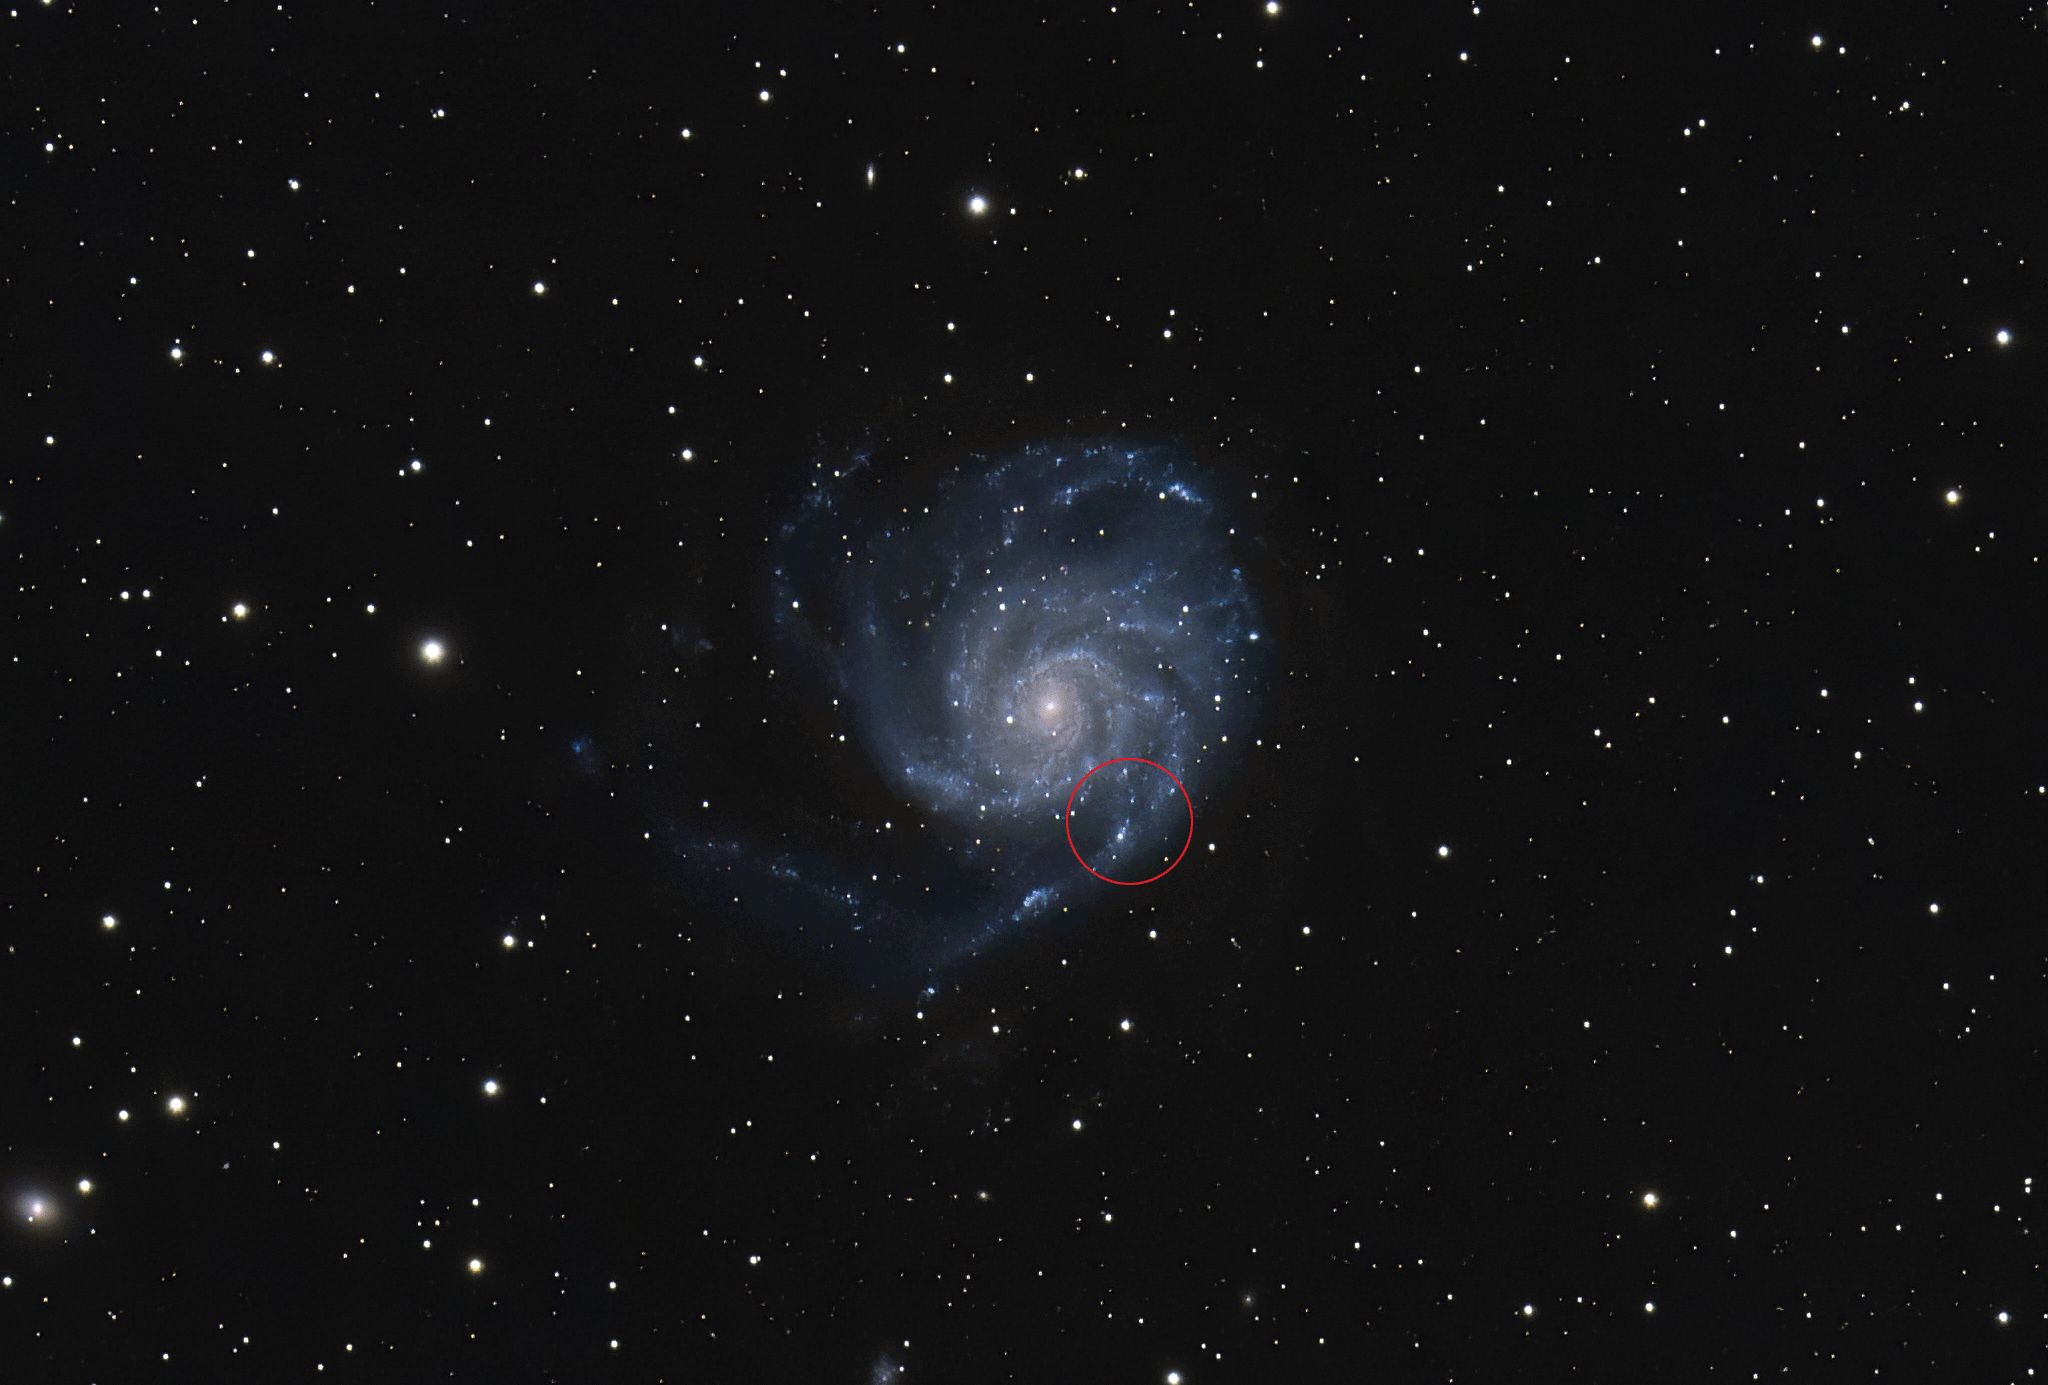 An animation of the supernova appearing in the lower spiral arm of the Pinwheel galaxy